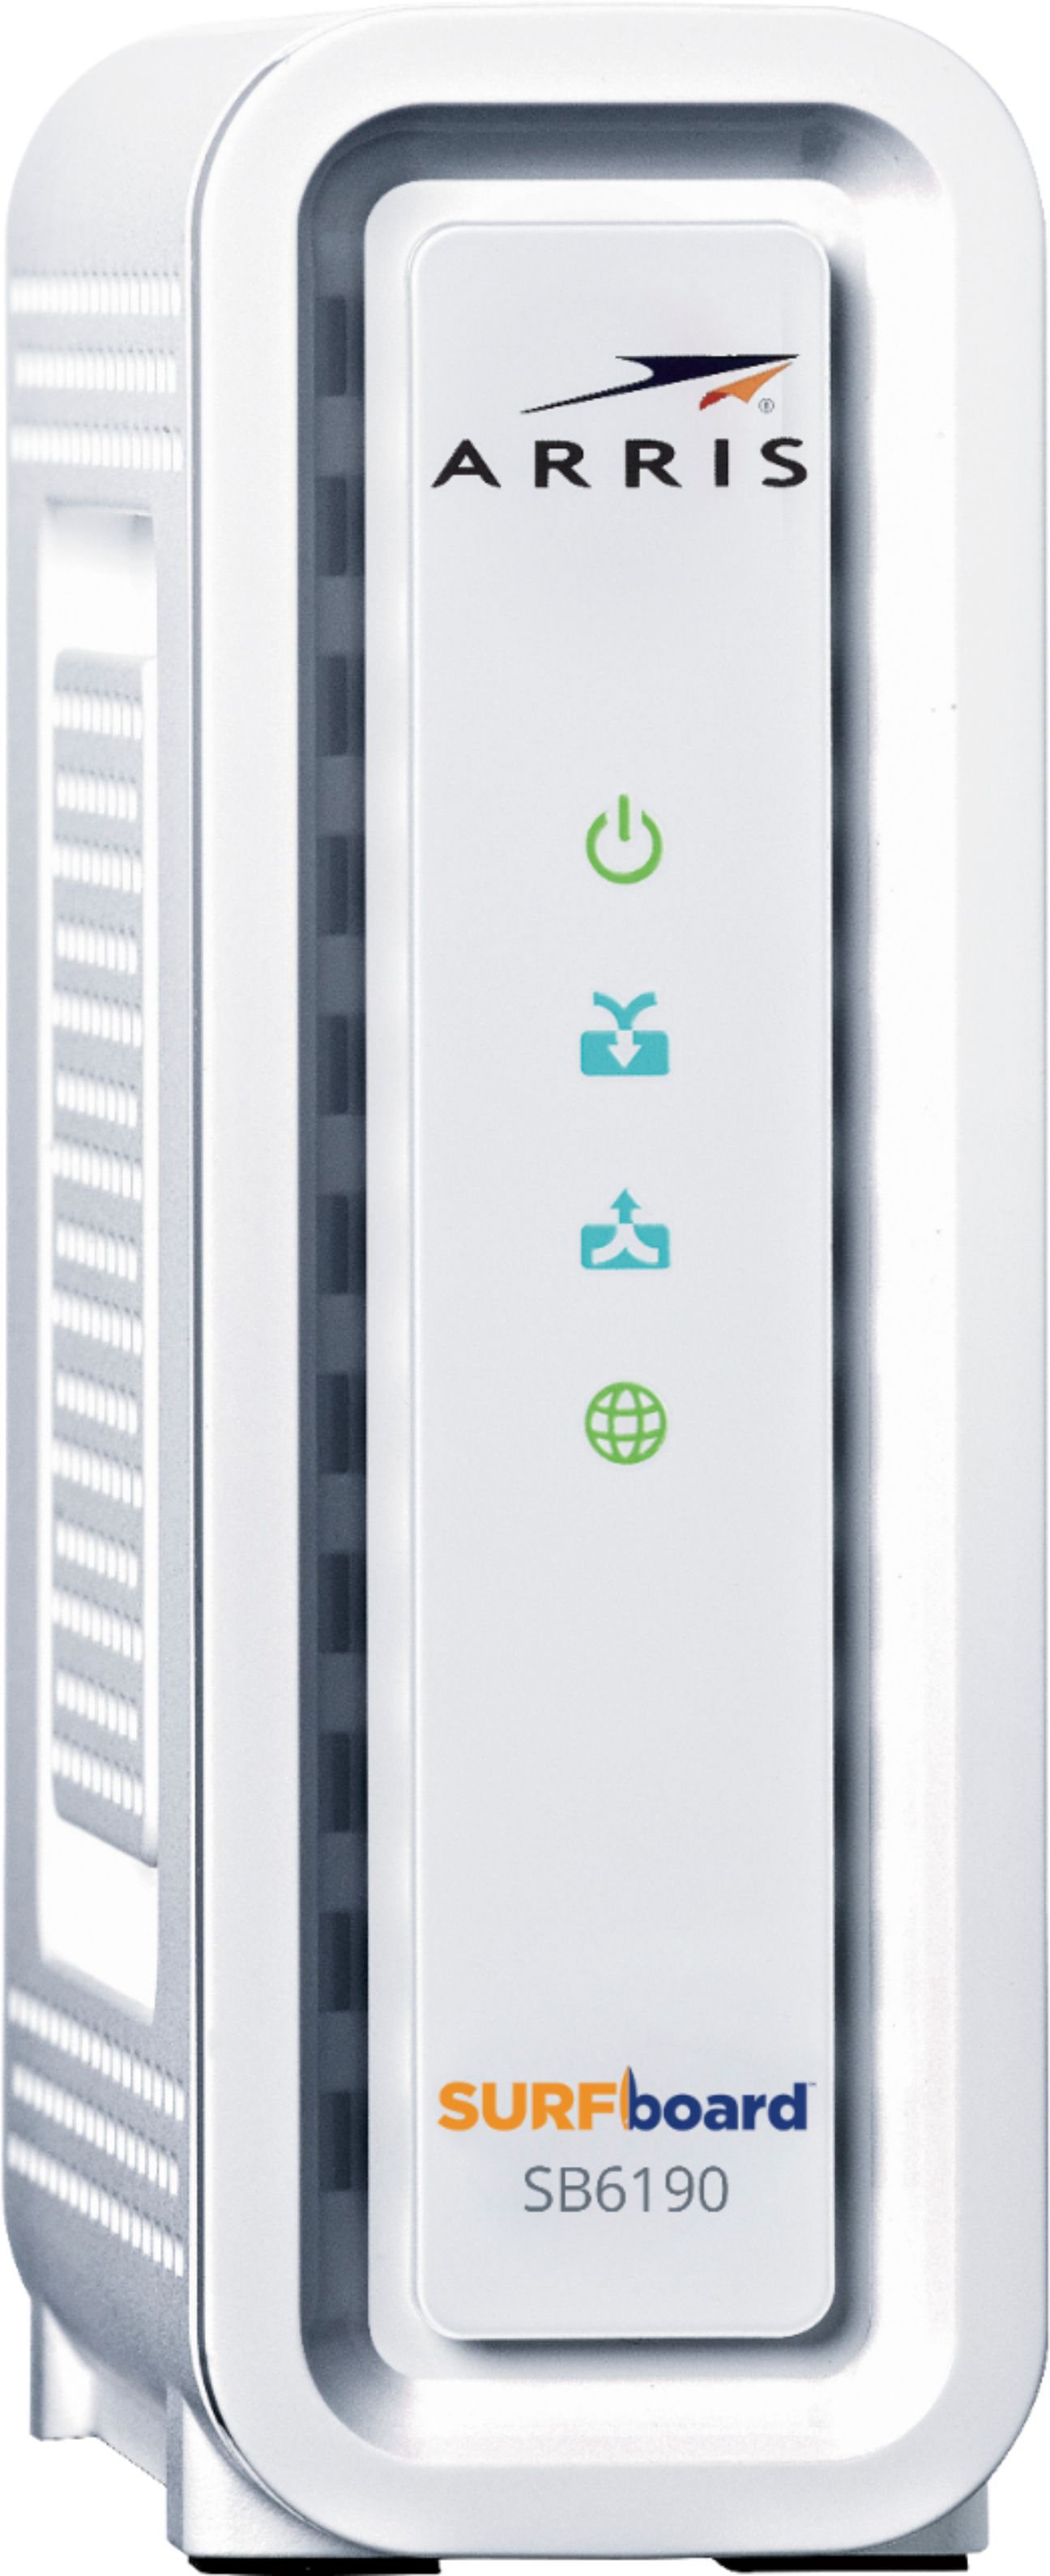 Angle View: ARRIS - SURFboard SB6183 16 x 4 DOCSIS 3.0 Cable Modem - White